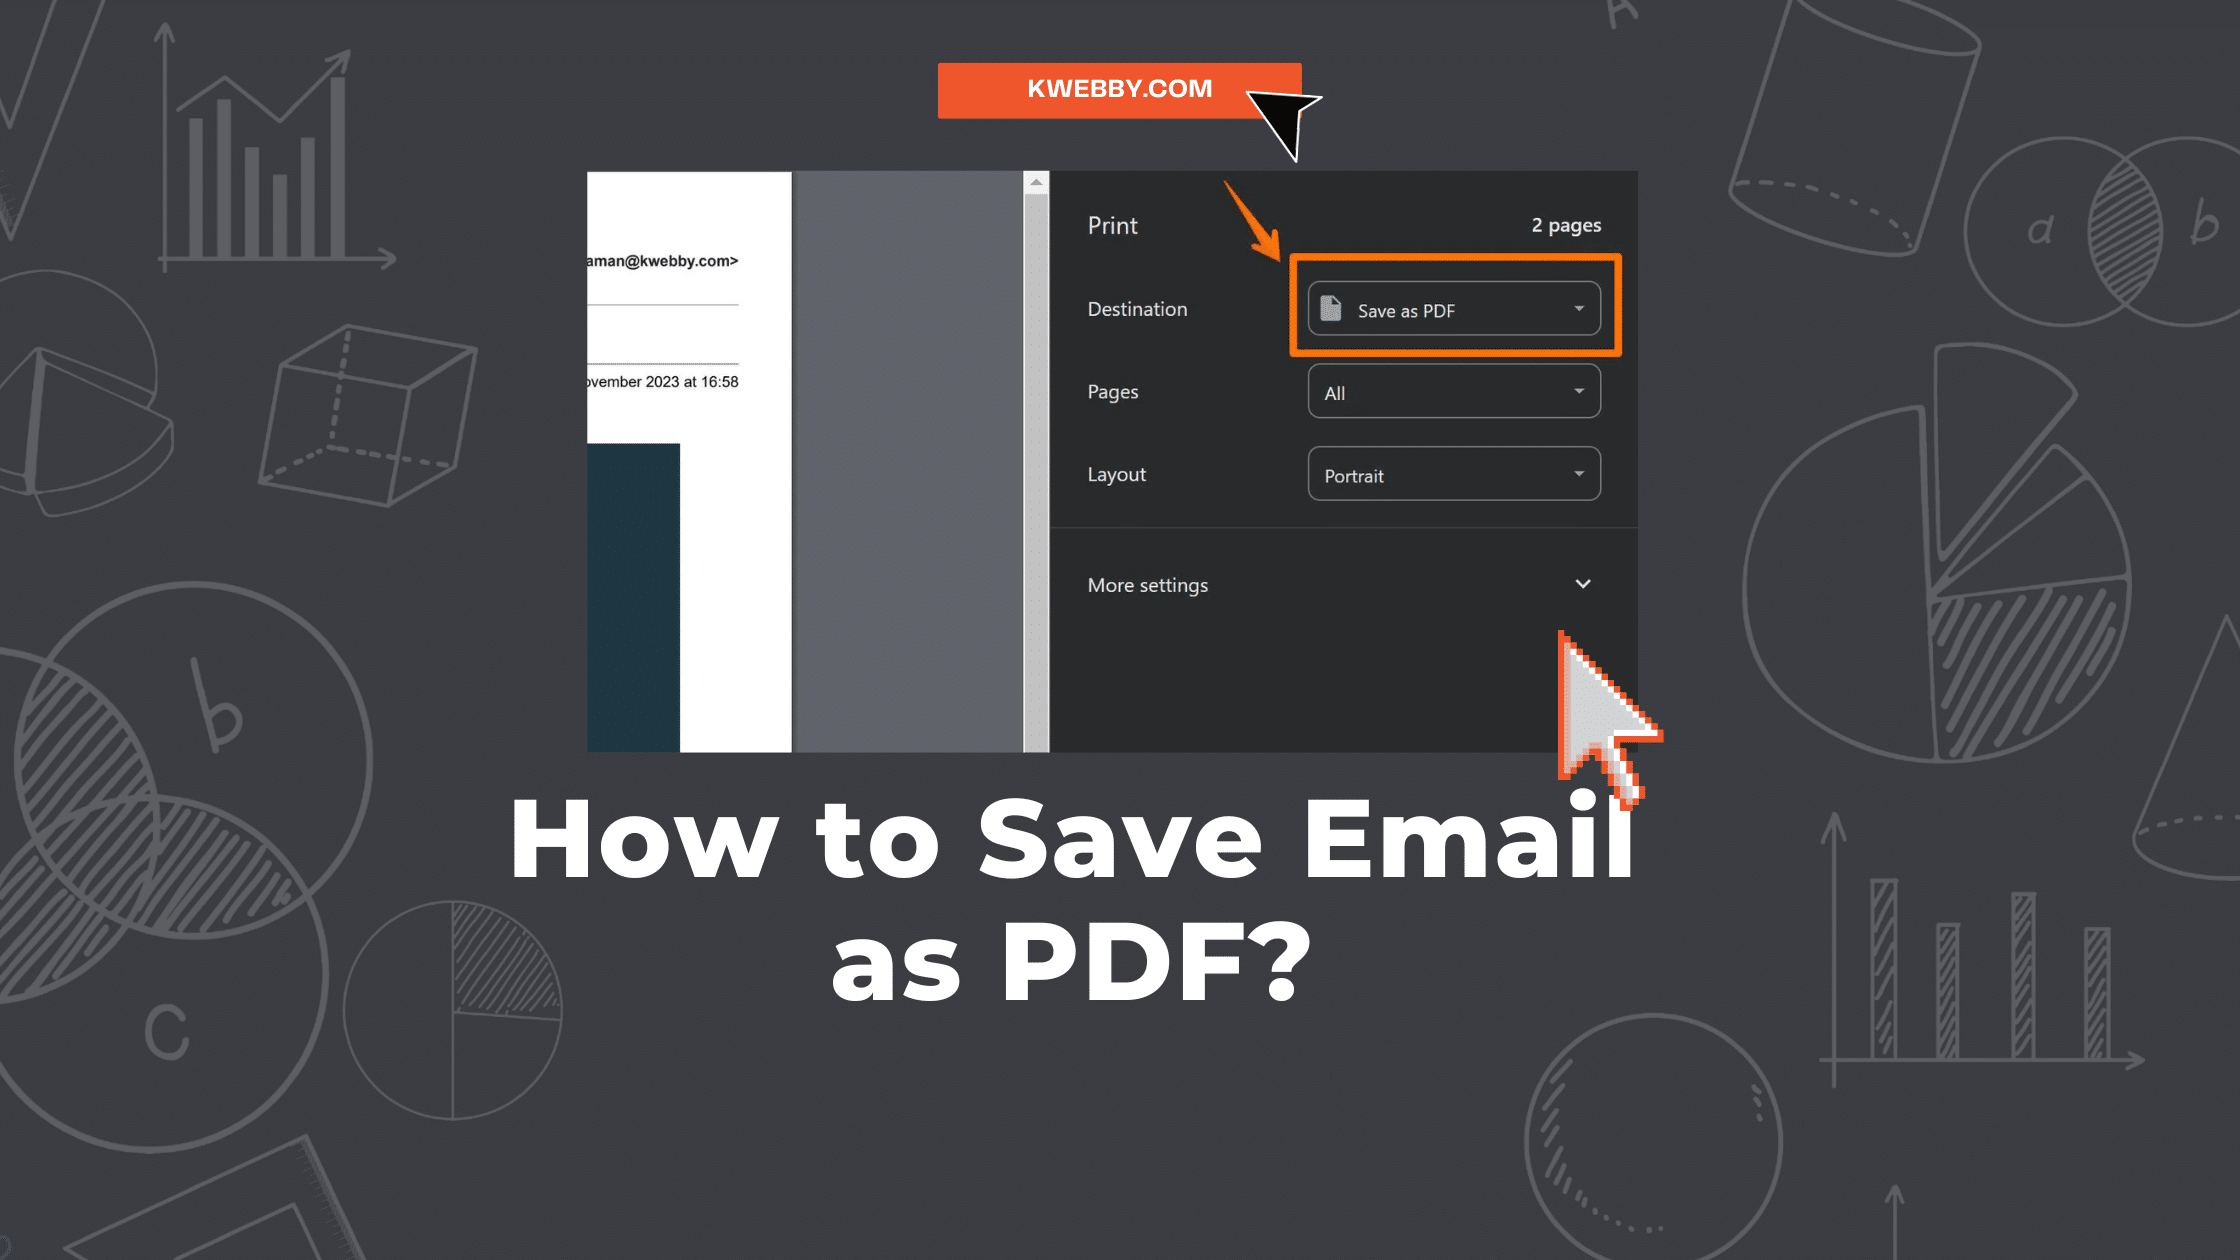 How to Save Email as PDF?